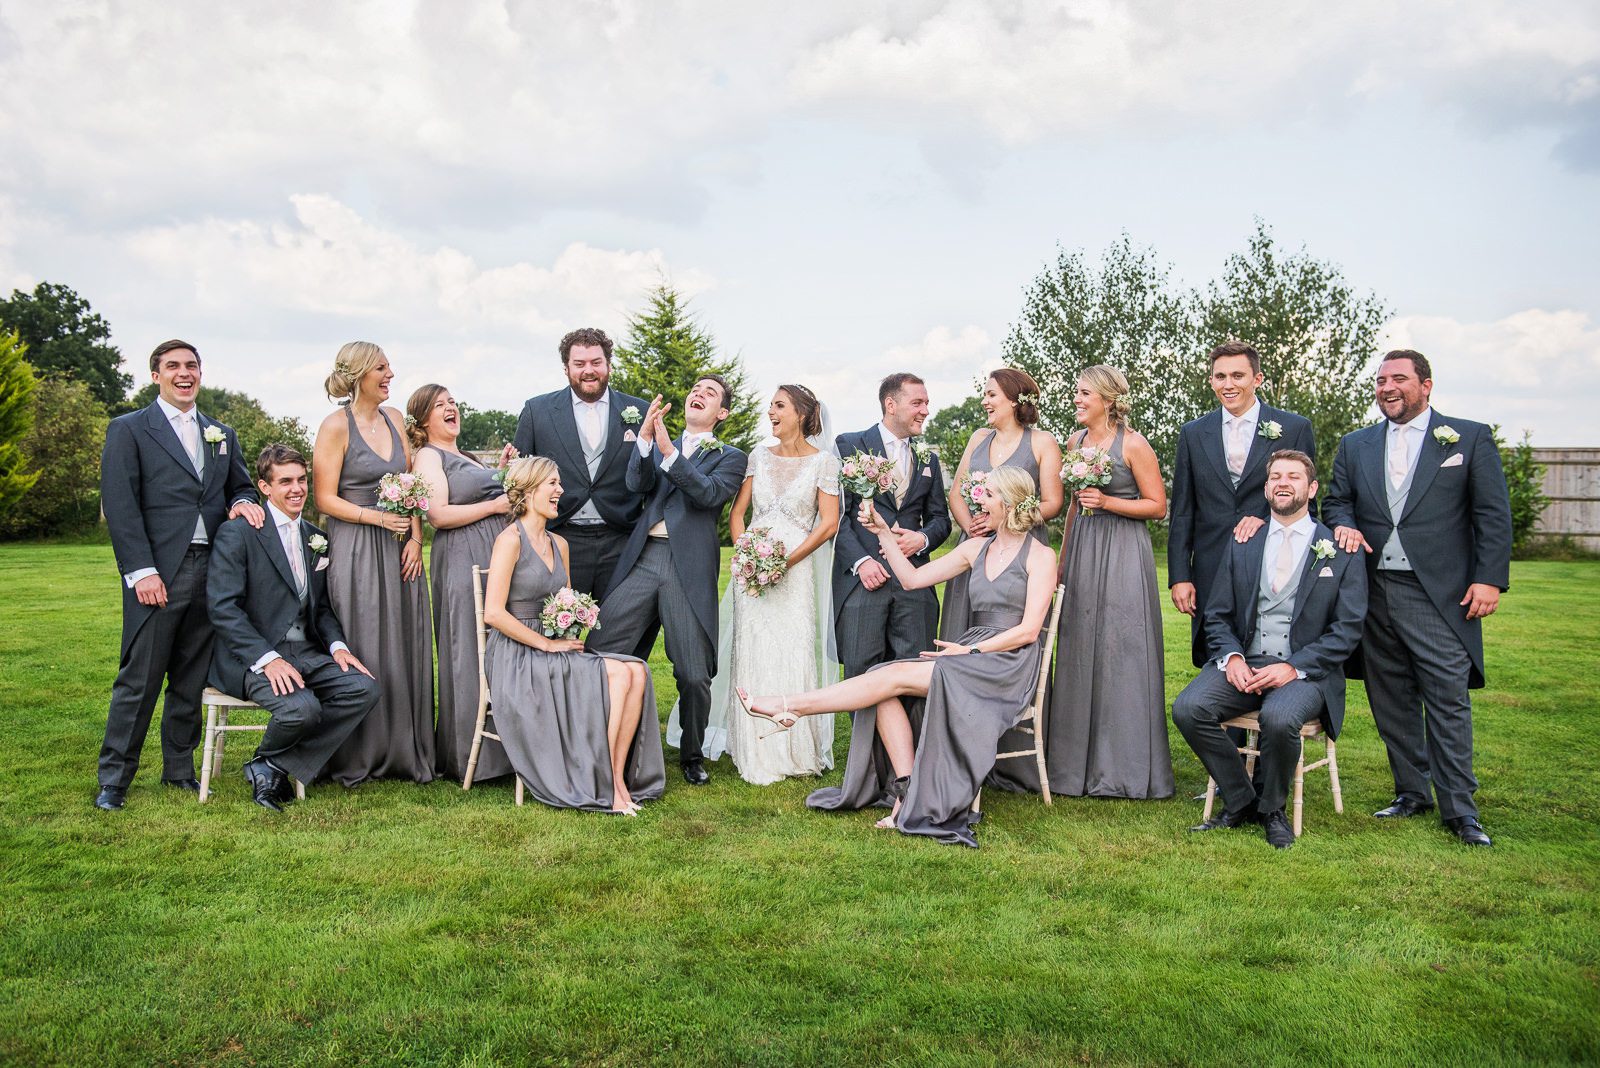 Original ideas for a fun fabulous group shot with sitting standing and laughing wedding party.